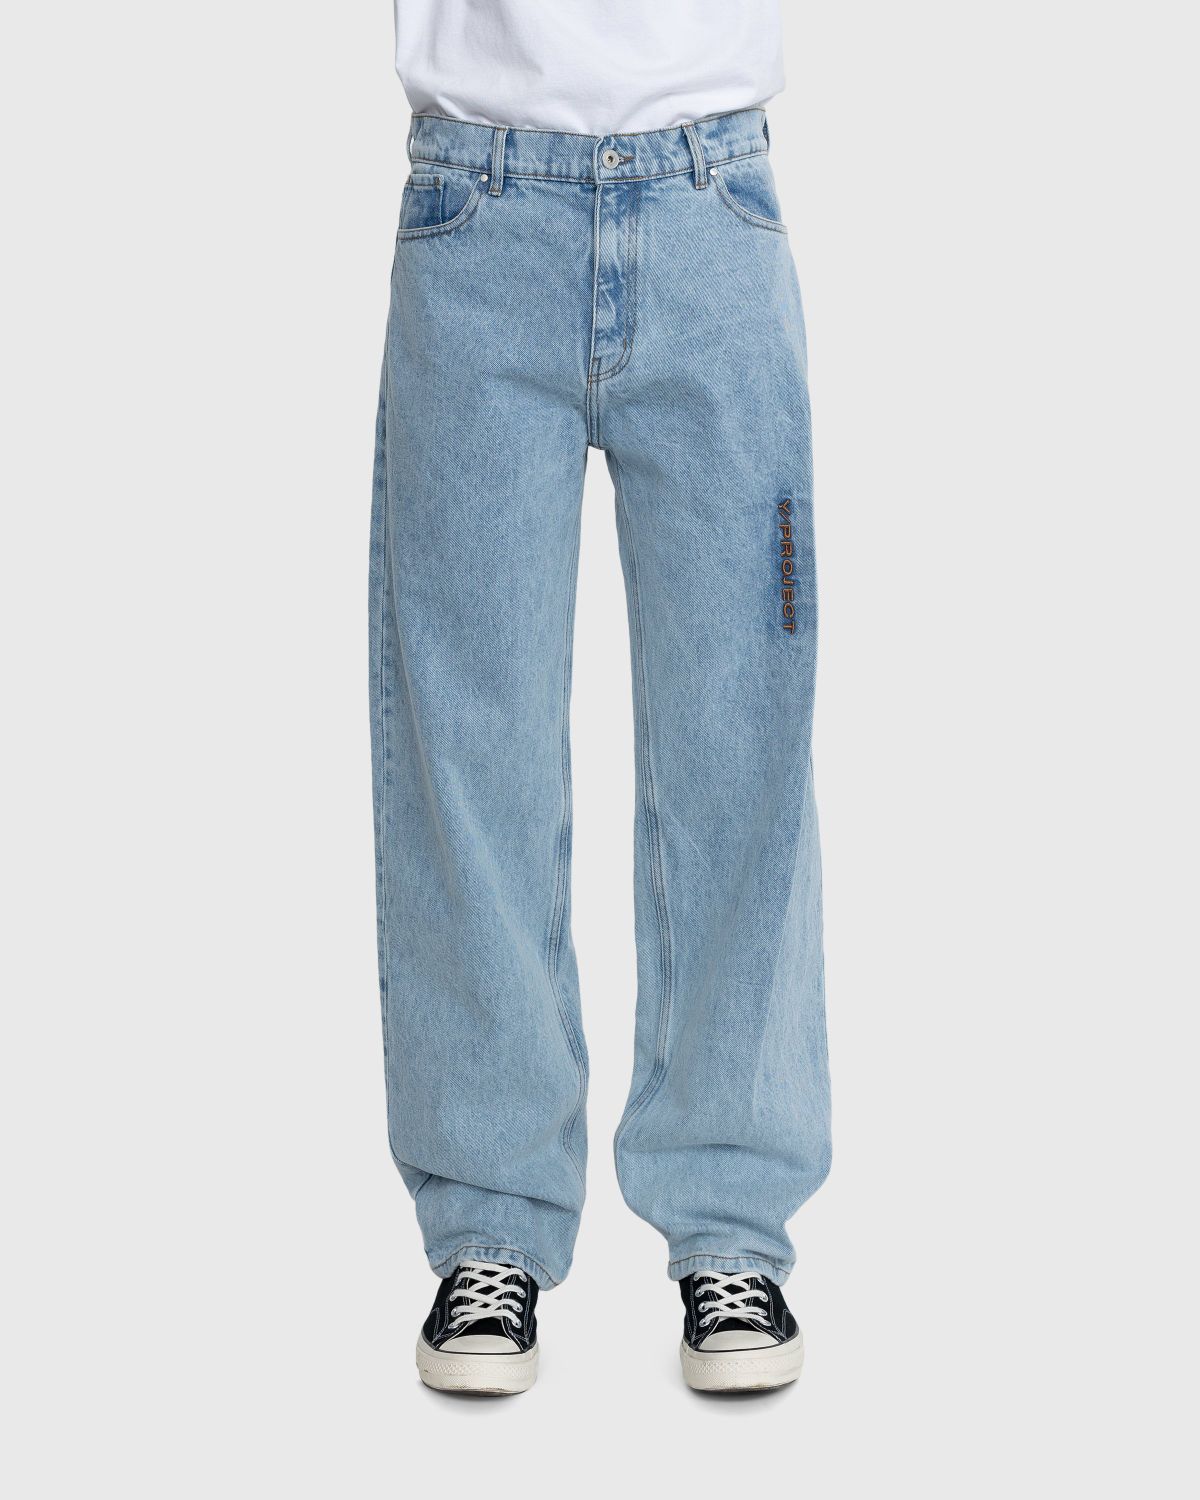 Y/Project – Pinched Logo Jeans Blue - Pants - Blue - Image 2